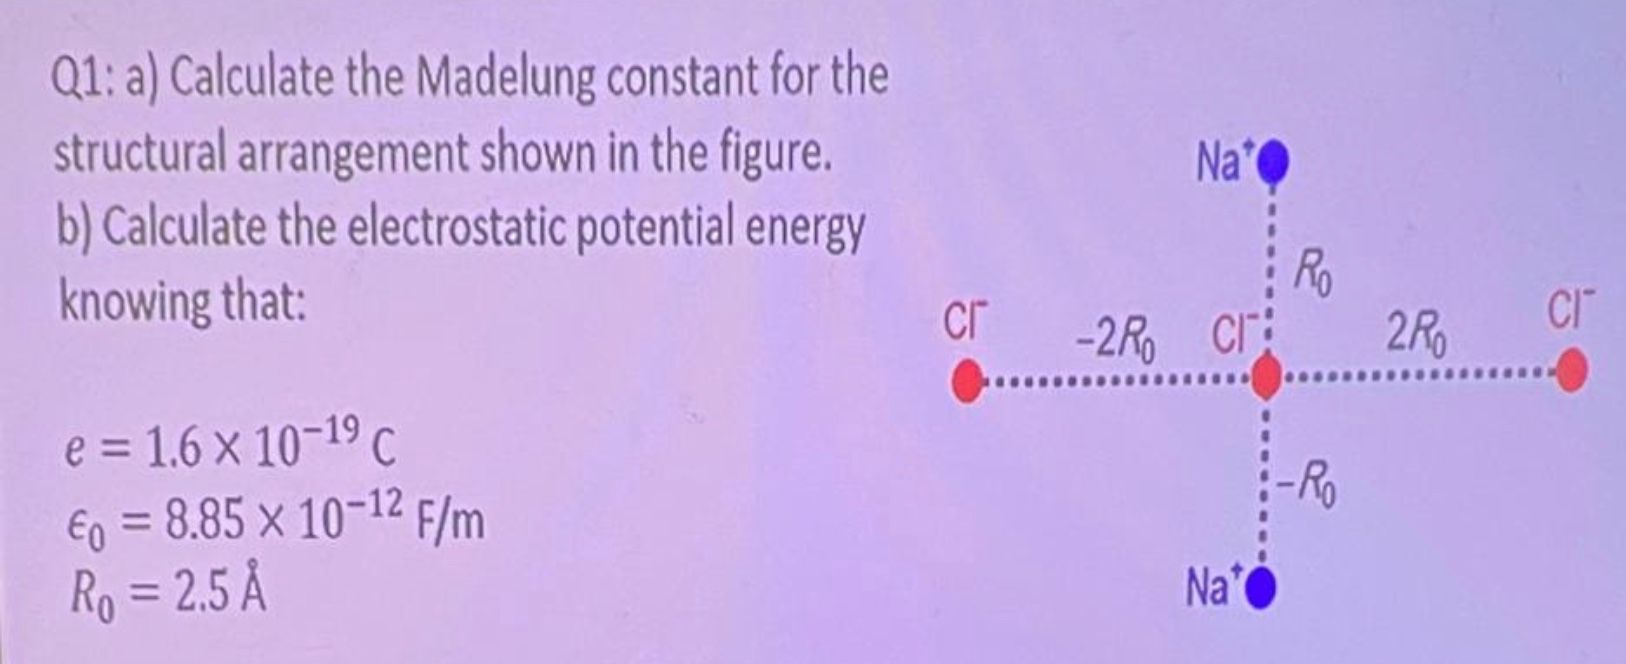 Q1: a) Calculate the Madelung constant for the structural arrangement shown in the figure. b) Calculate the electrostatic pot